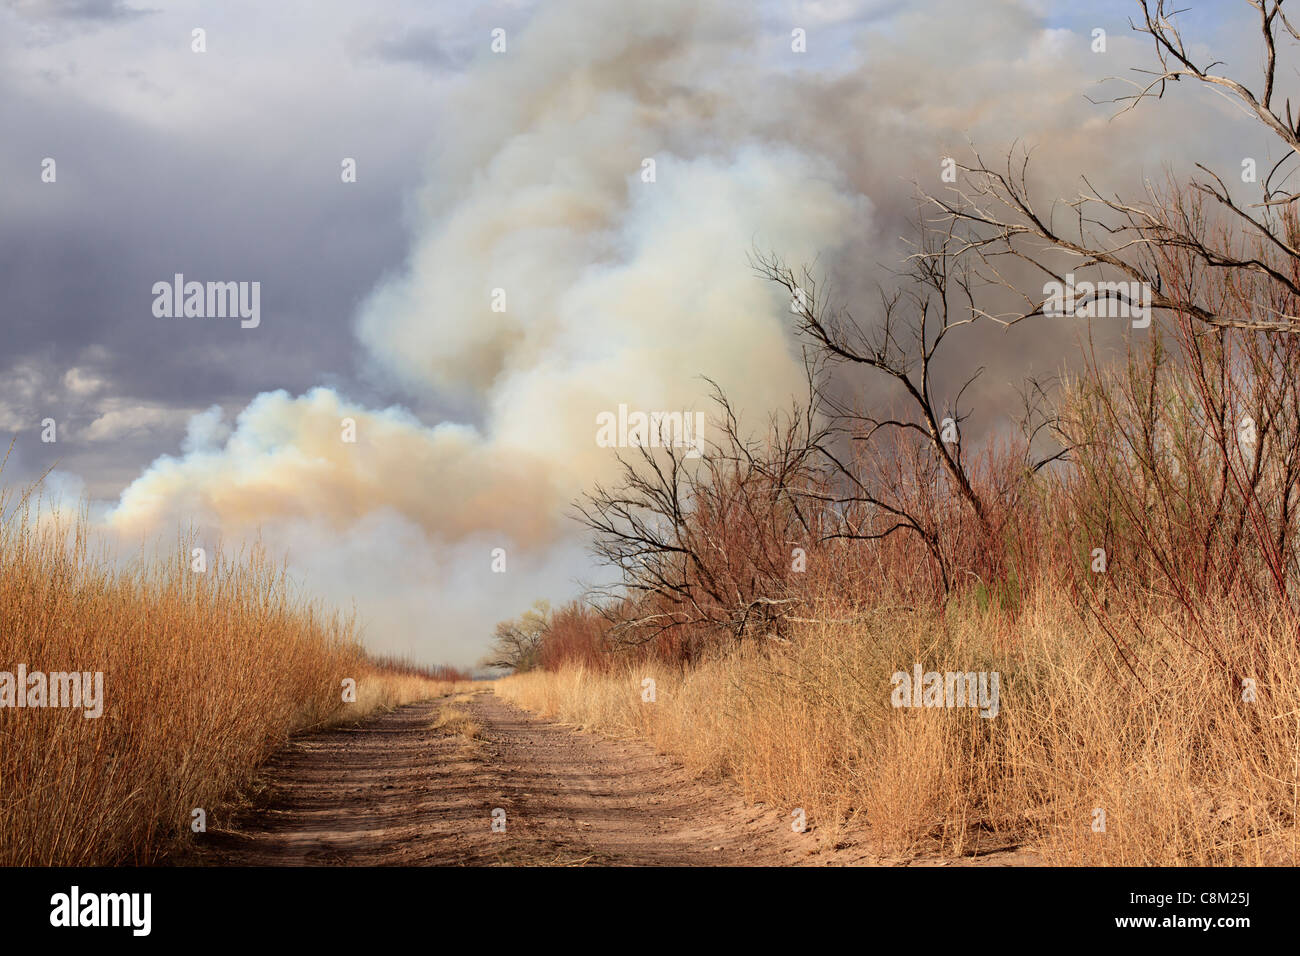 Smoke from a New Mexico wildfire burning in dry terrain. Stock Photo